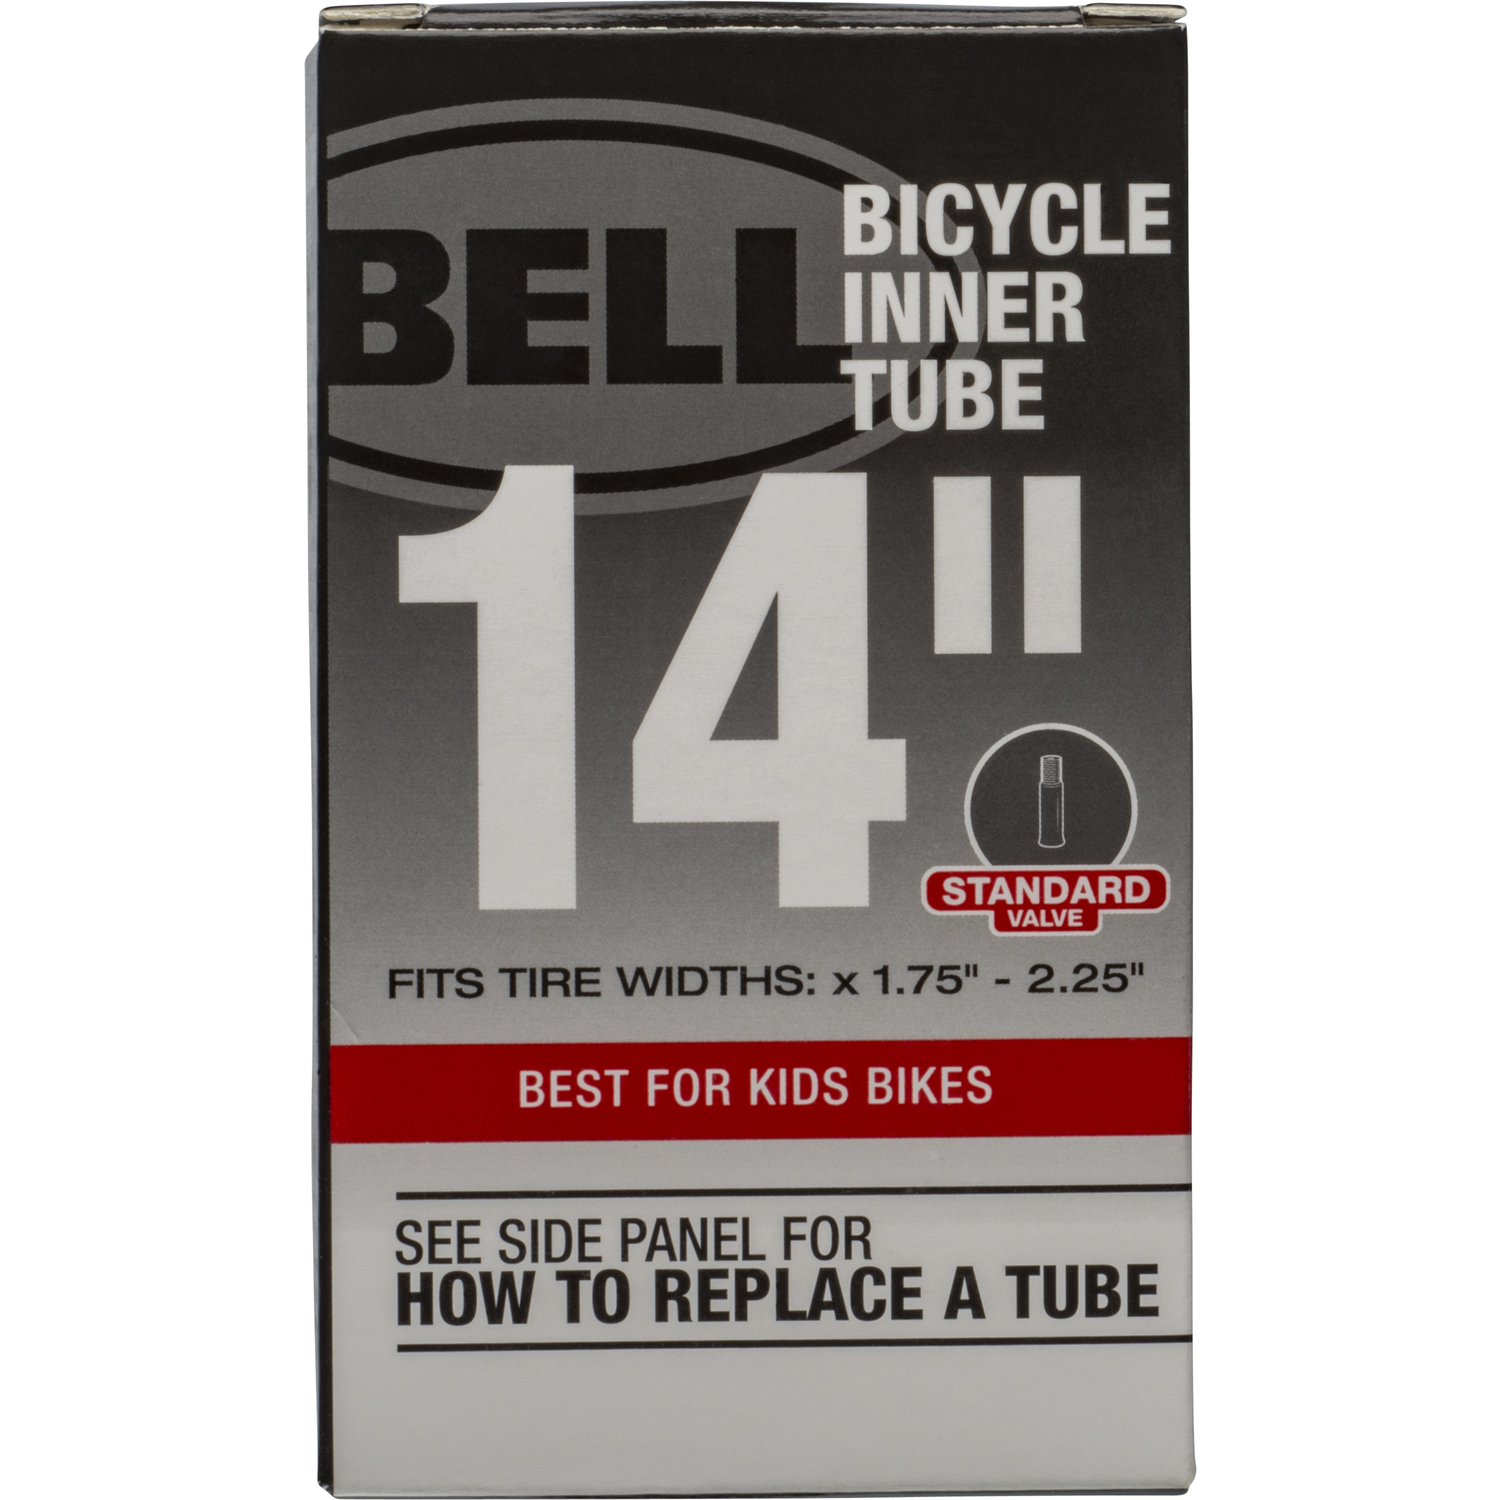 places that sell bike inner tubes near me